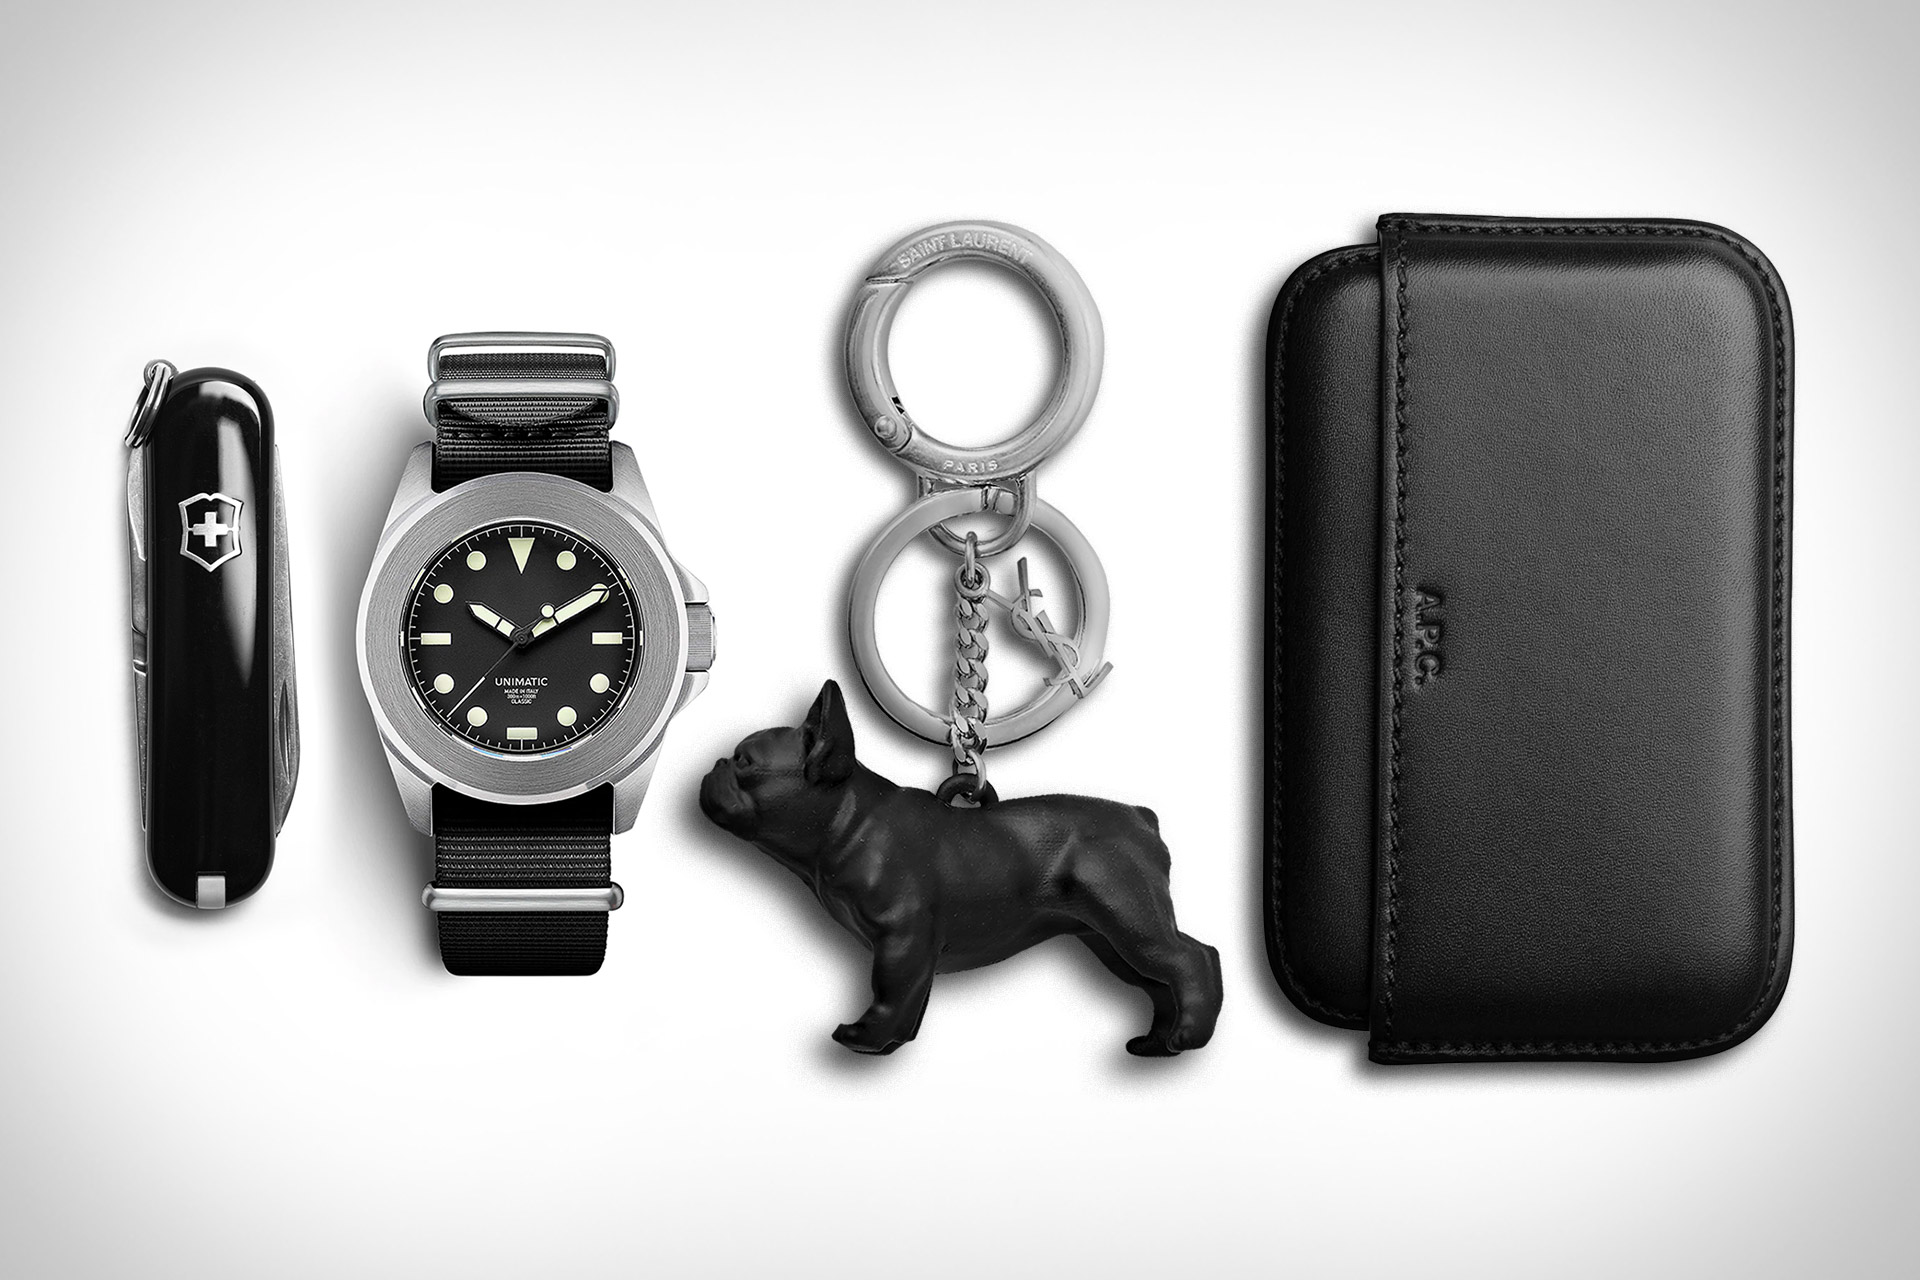 Everyday Carry: Bulldog | Uncrate, #Everyday #Carry #Bulldog #Uncrate